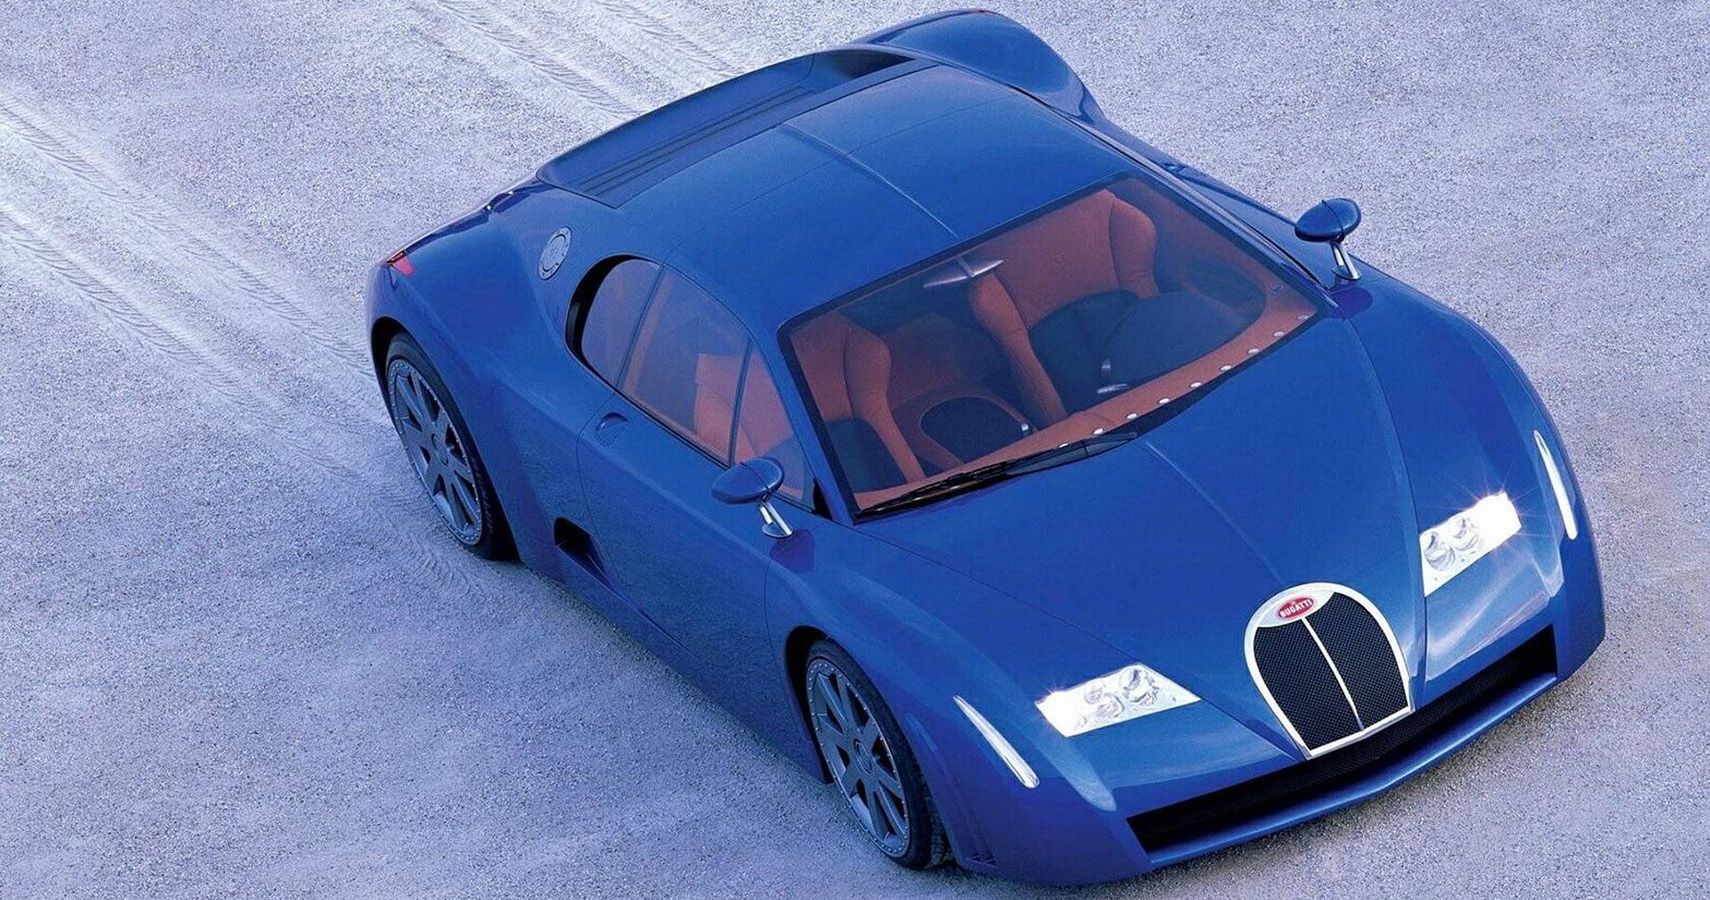 1999 Bugatti 18/3 Chiron Concept A Mid-Engine Sports Car At The Time